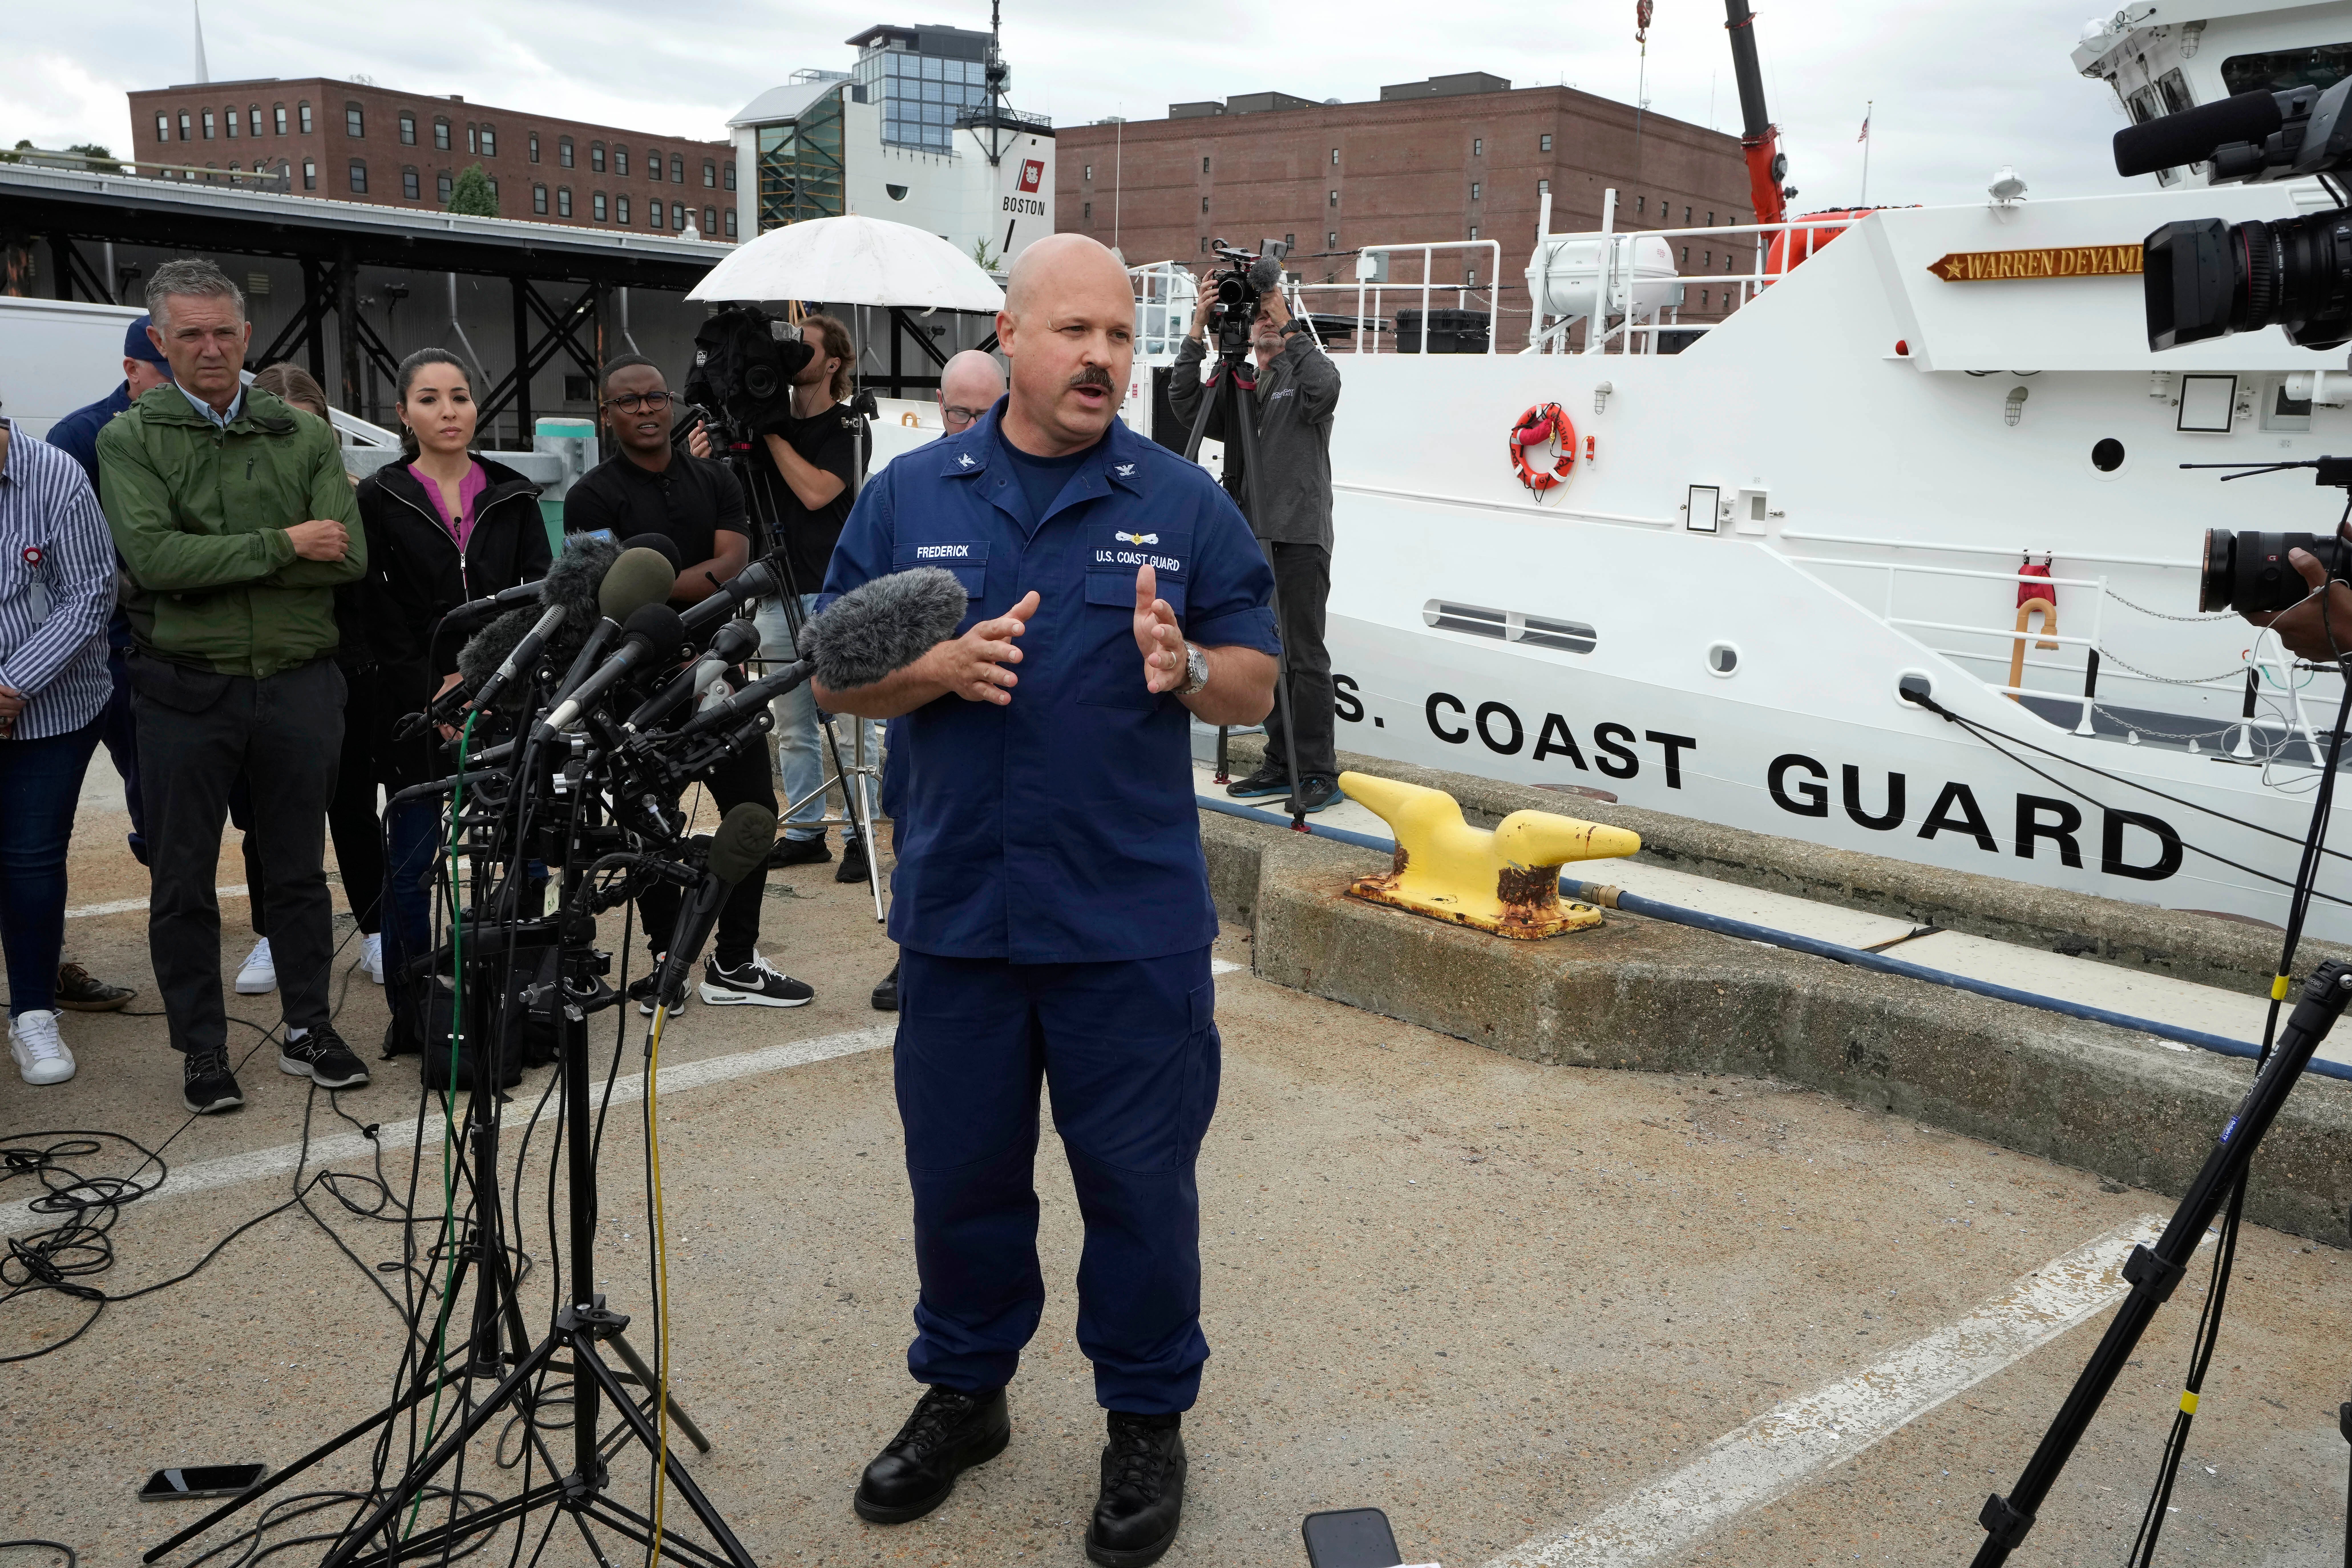 Captain Jamie Frederick told reporters that the “complex” search had “not yet yielded any results”